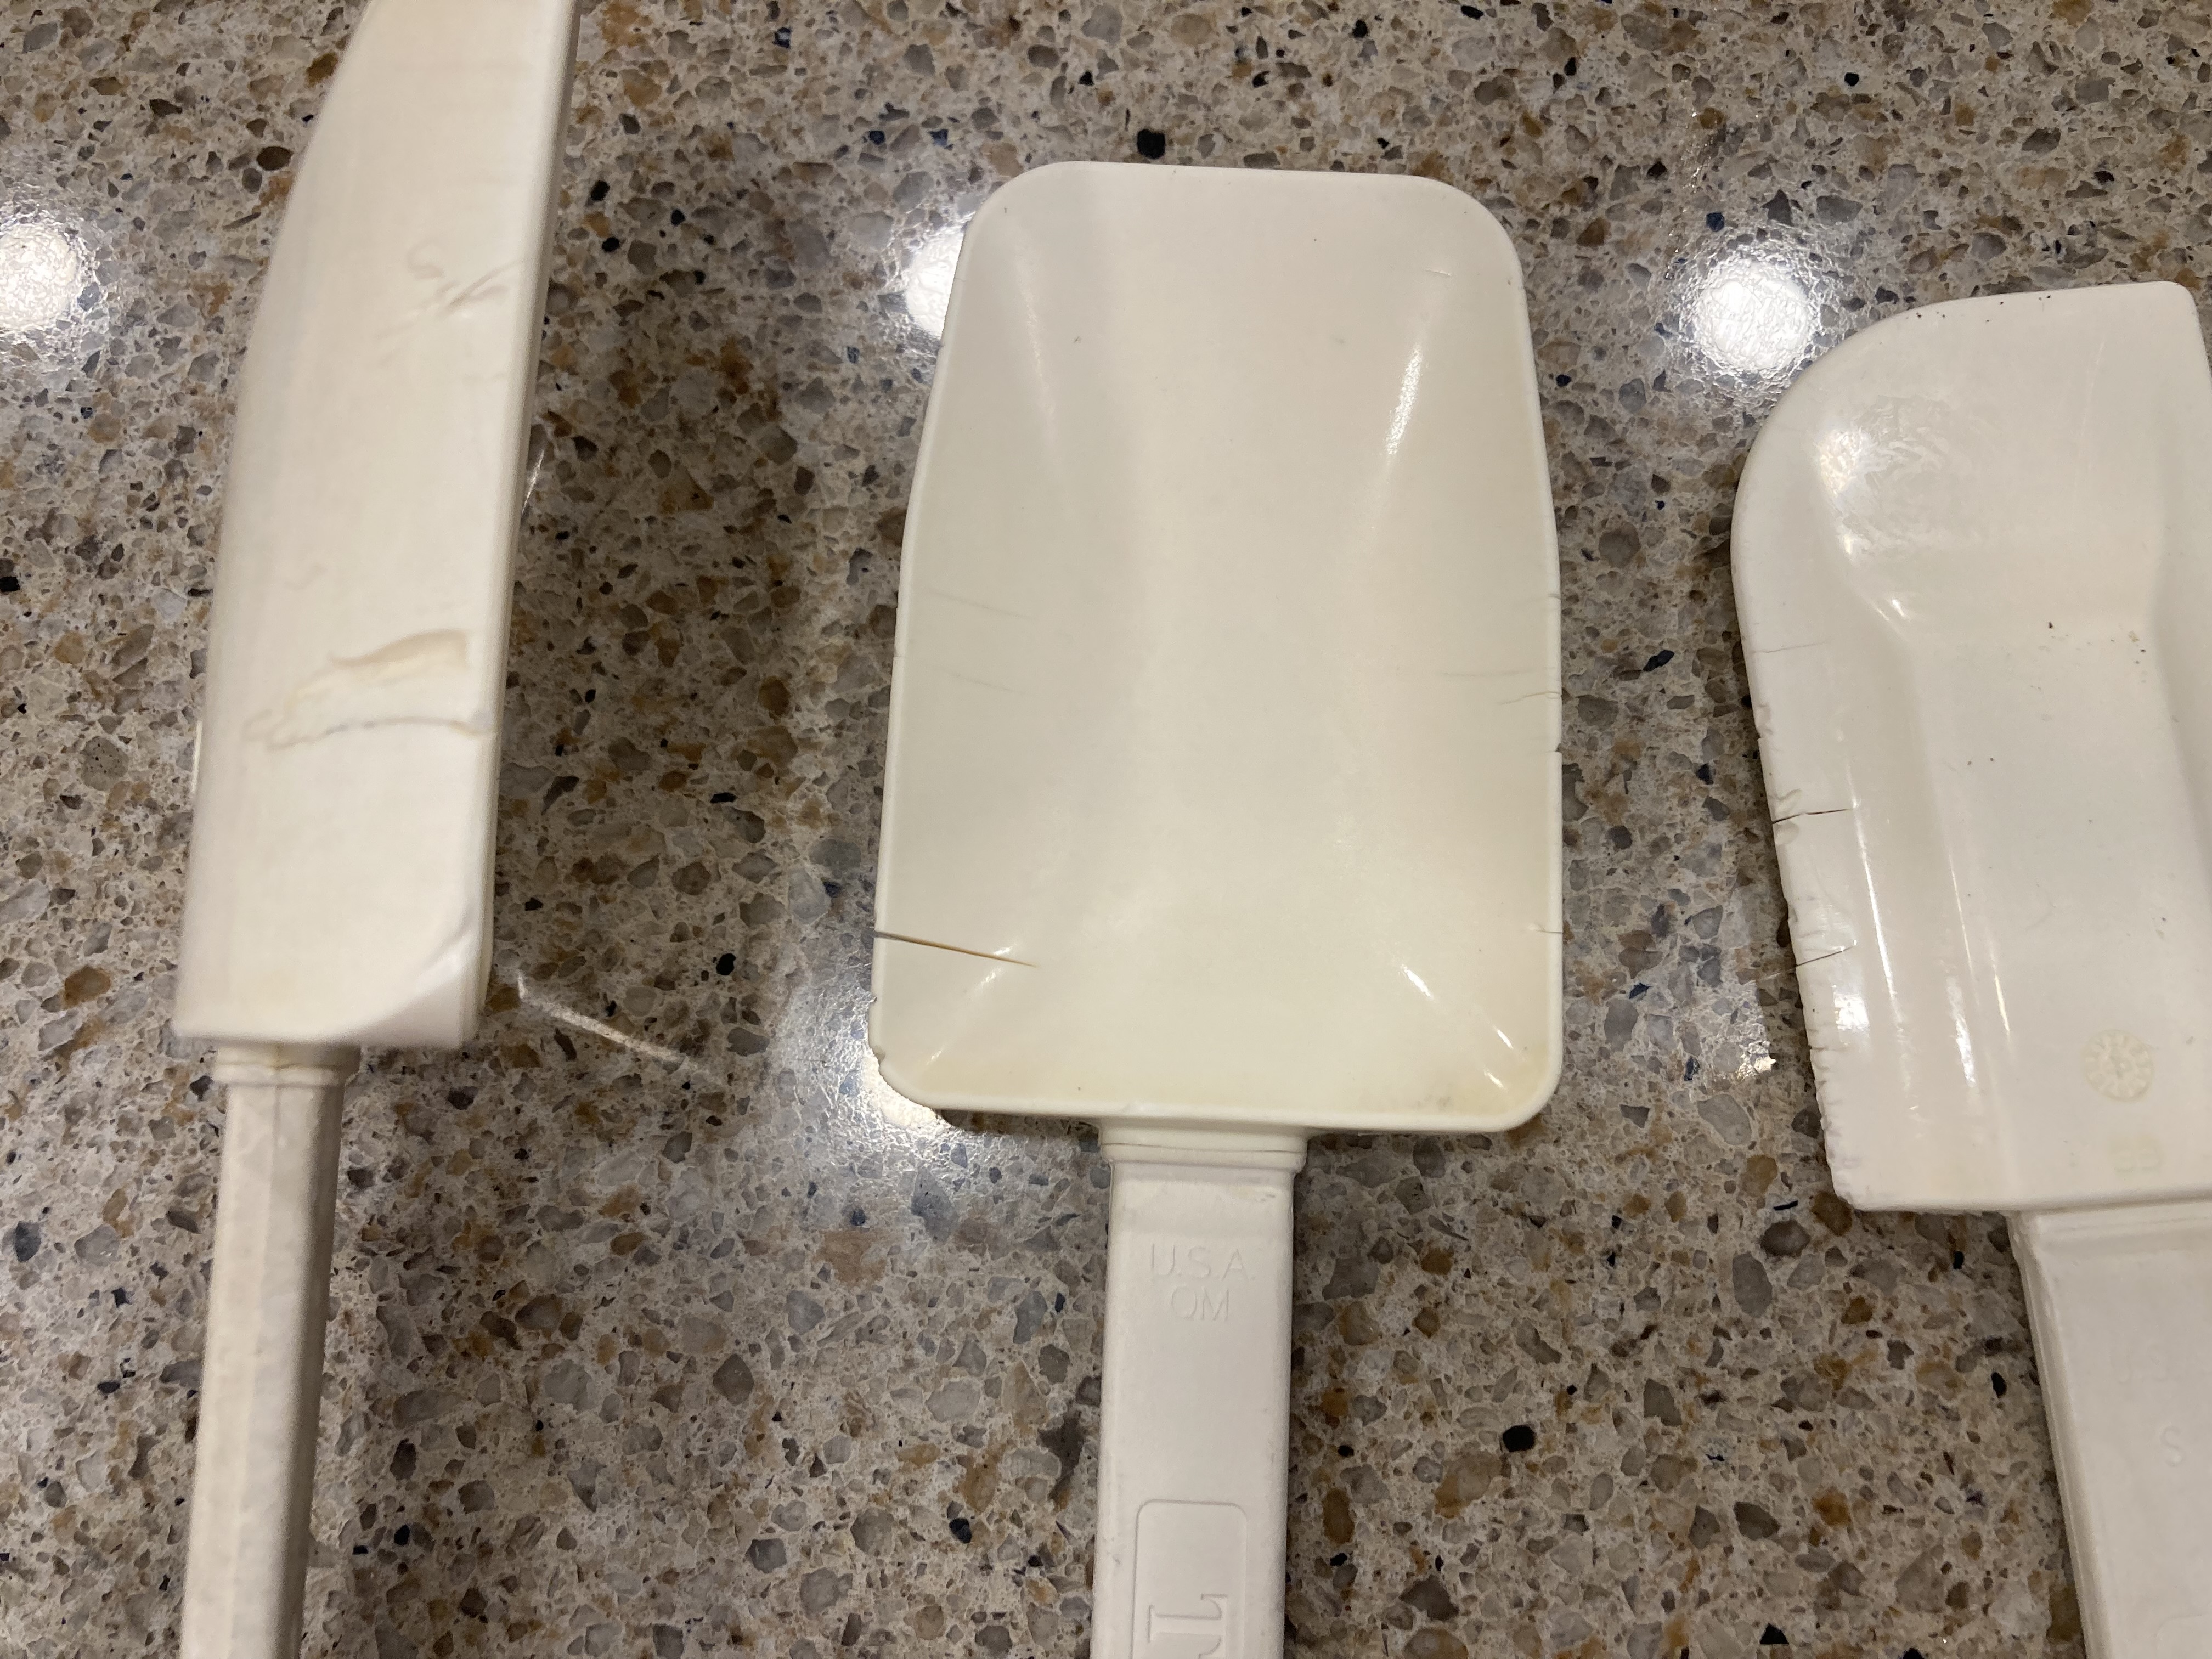 5 Pampered Chef Items Not Worth The Money